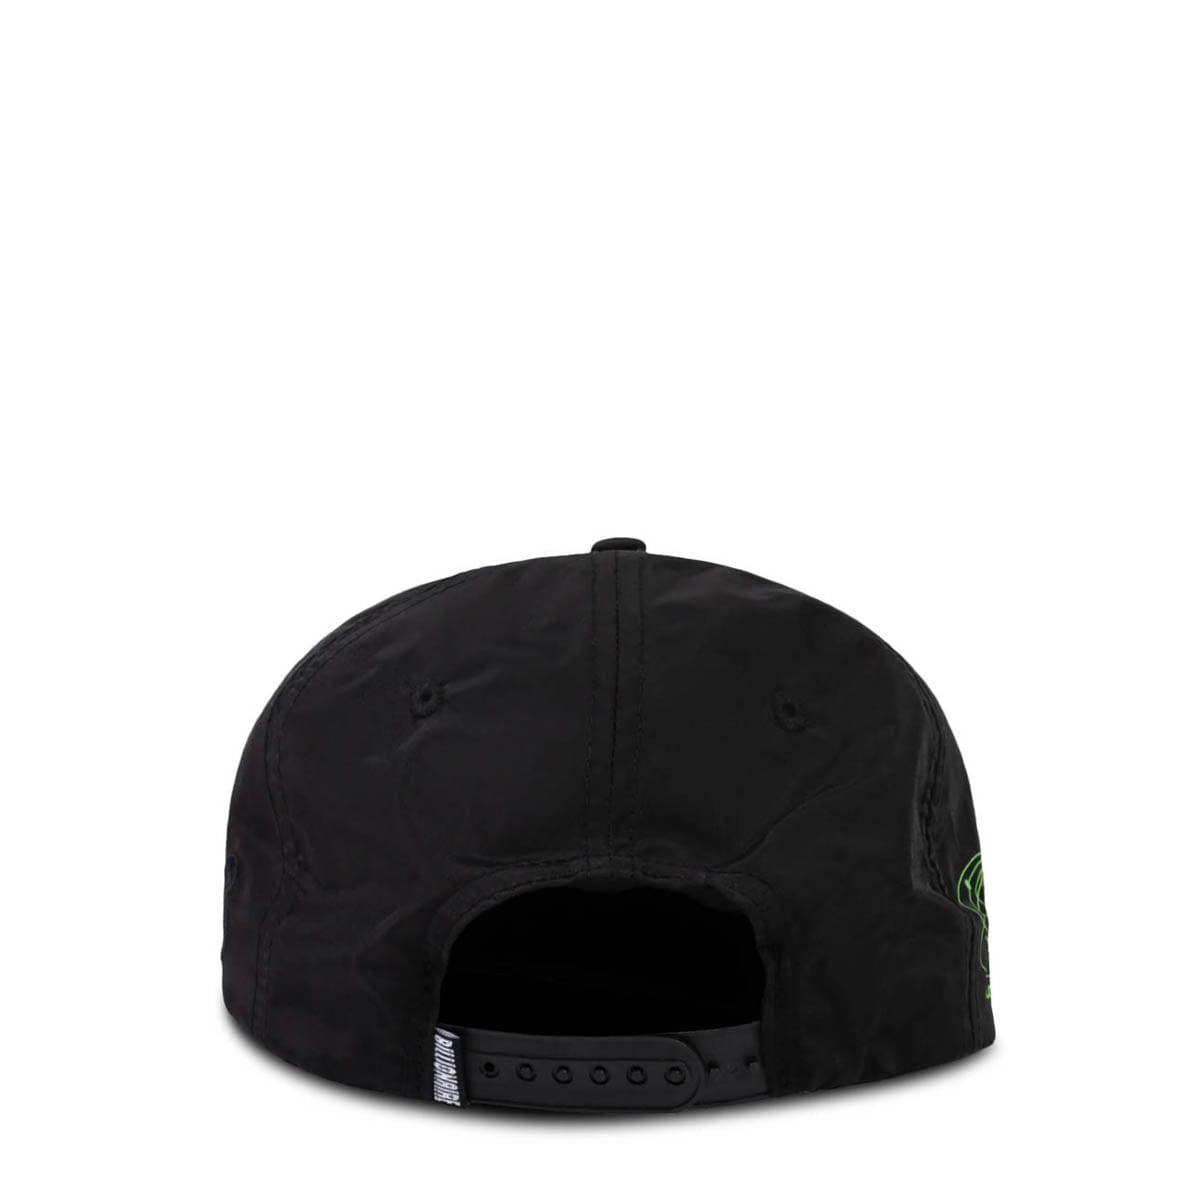 Billionaire Boys Club Accessories - HATS - Snapback-Fitted Hat BLACK / O/S BB WAVE RIDER SNAPBACK